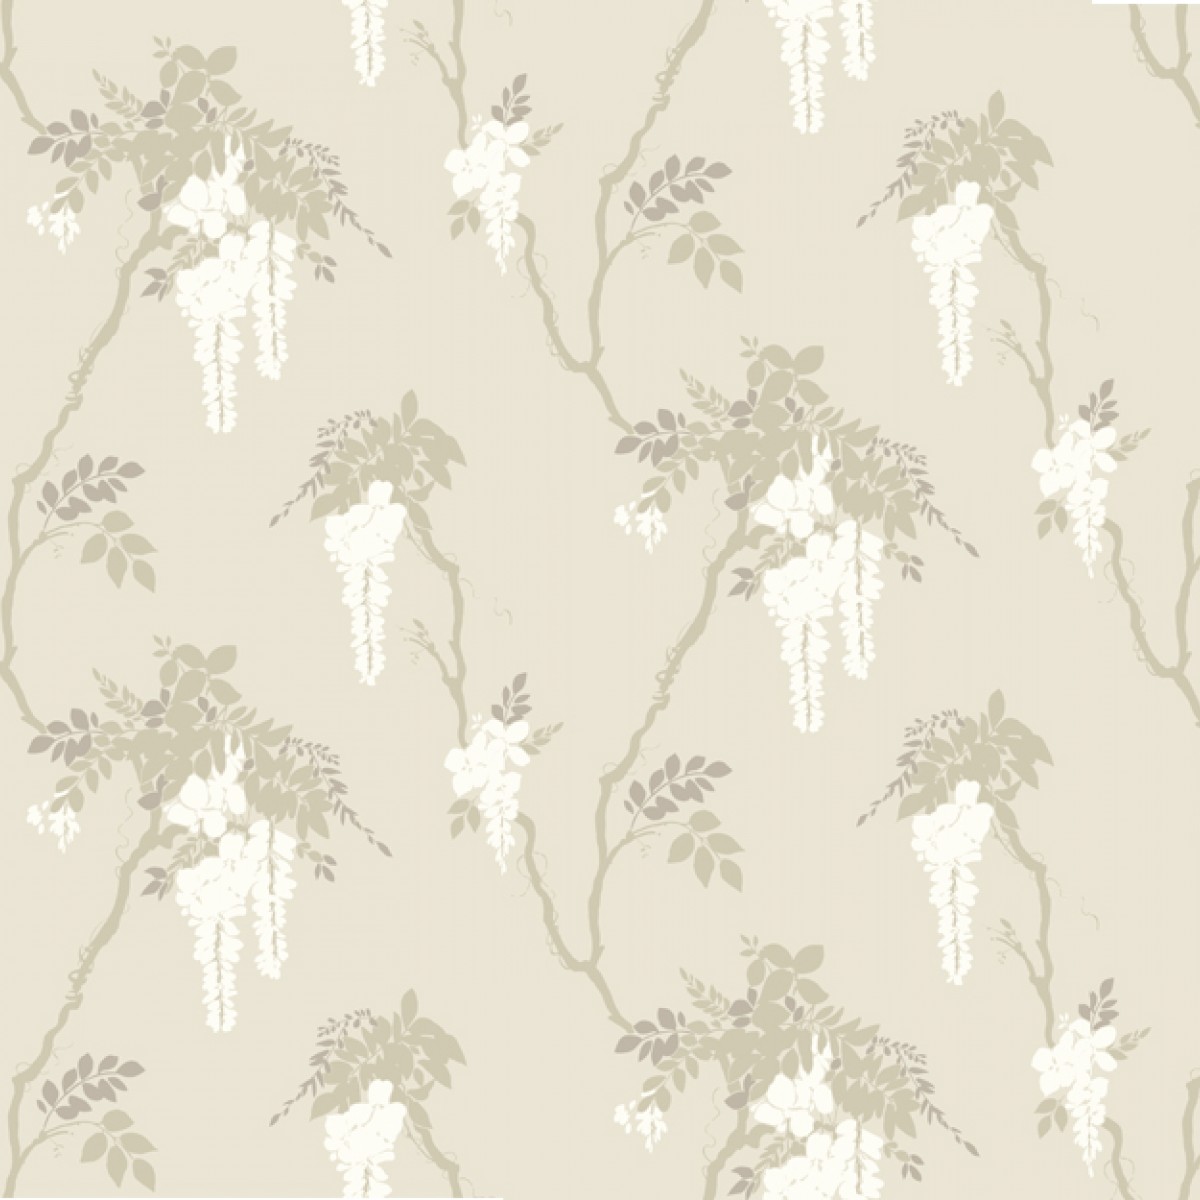 Tapet Leonora, Ivory Neutral Luxury Floral, 1838 Wallcoverings, 5.3mp / rola, Tapet living 